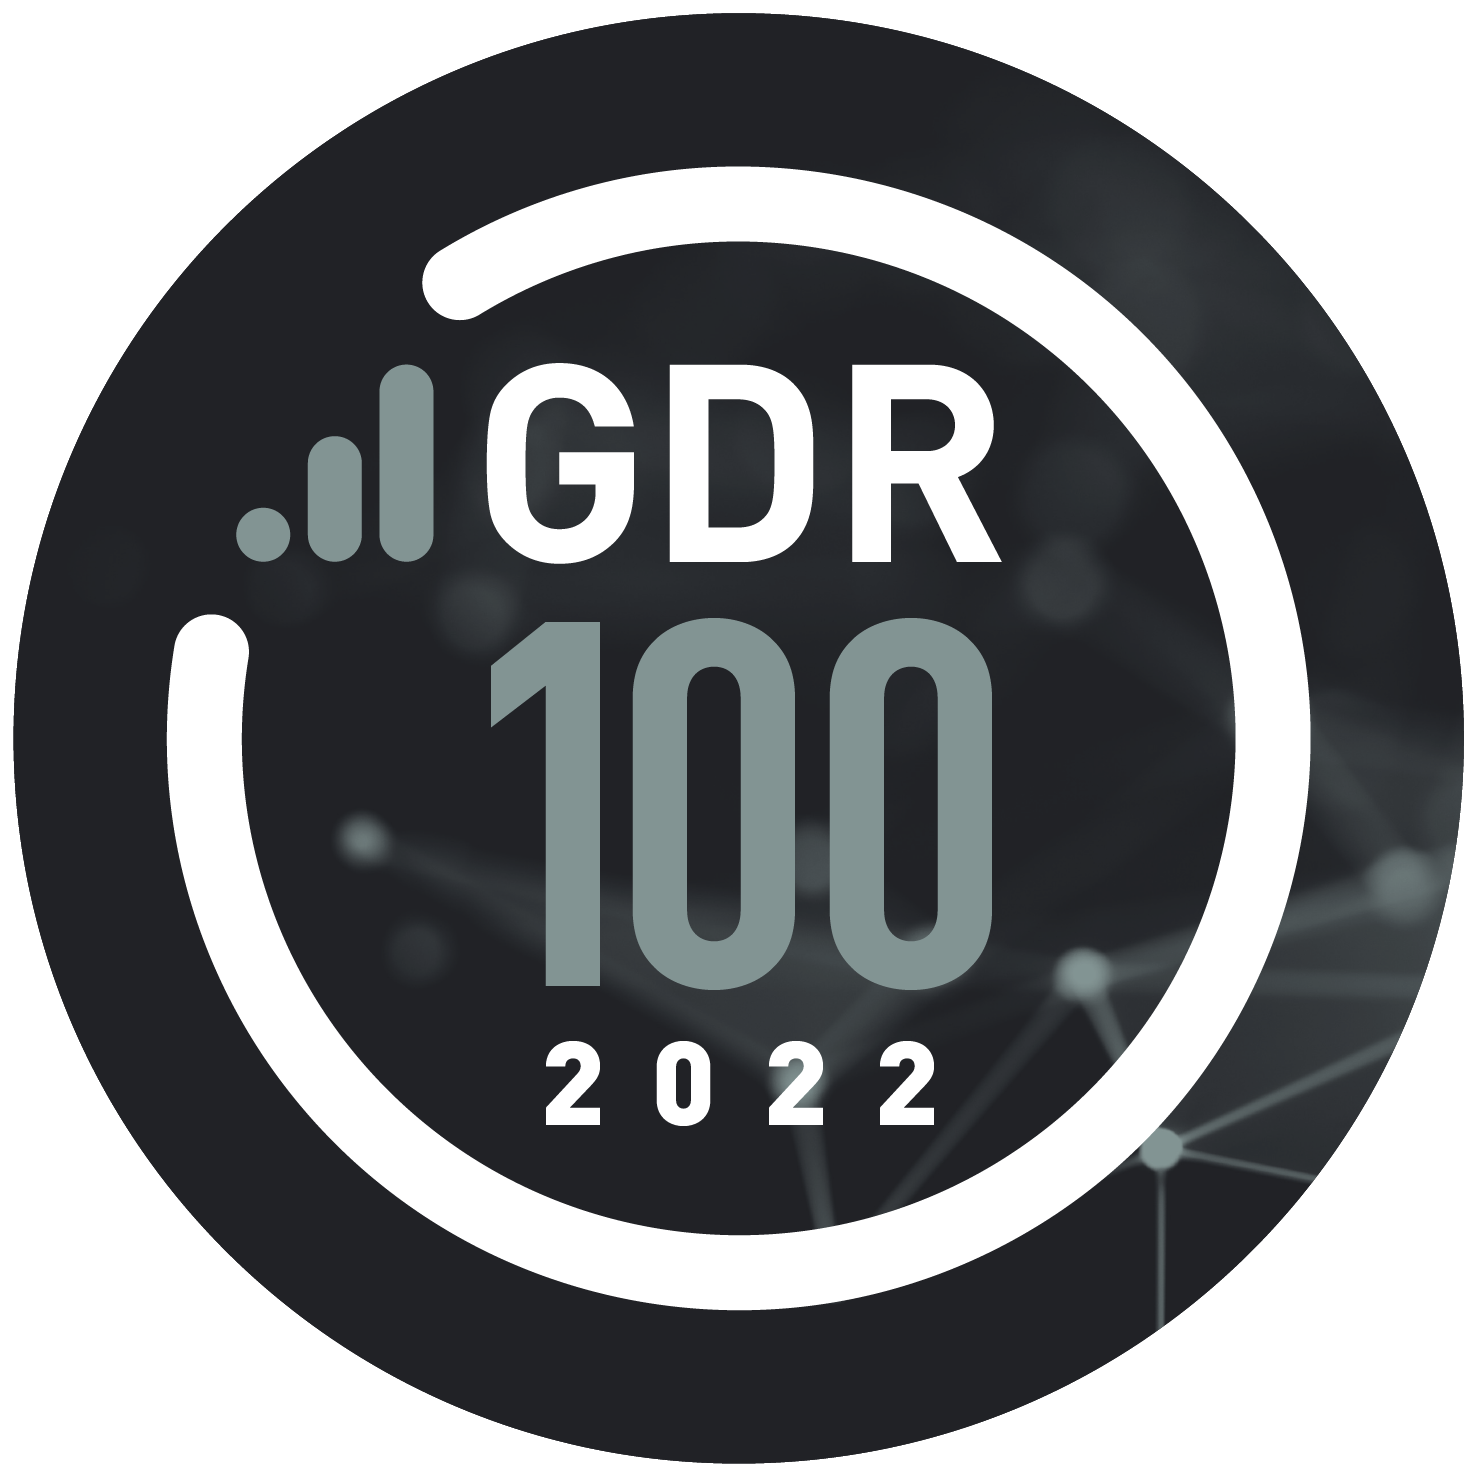 ALRUD is ranked in top-100 law firms according to the Global Data Review 2021, 2022